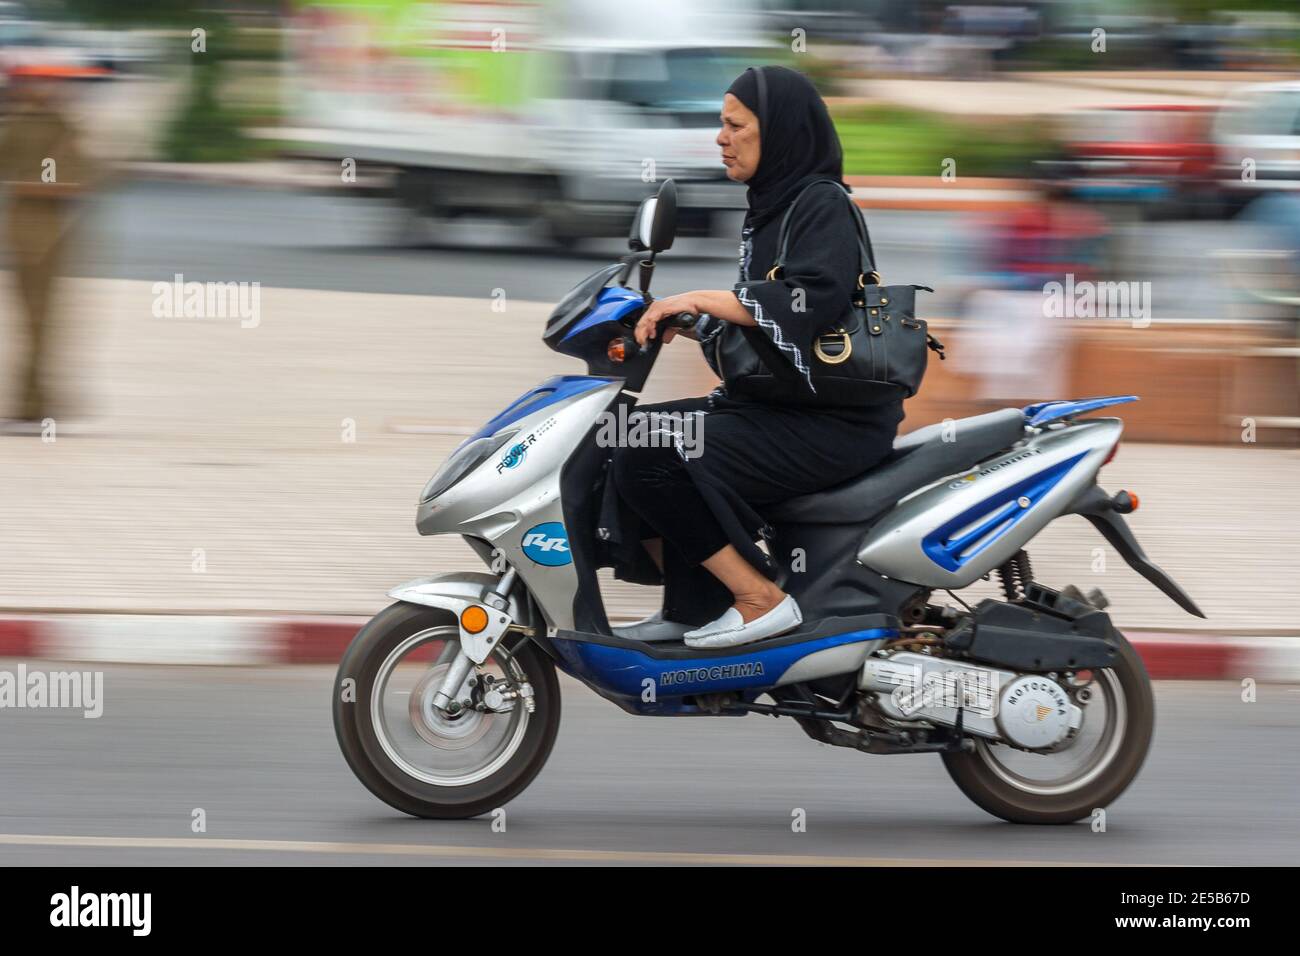 Arab woman on scooter Stock Photo